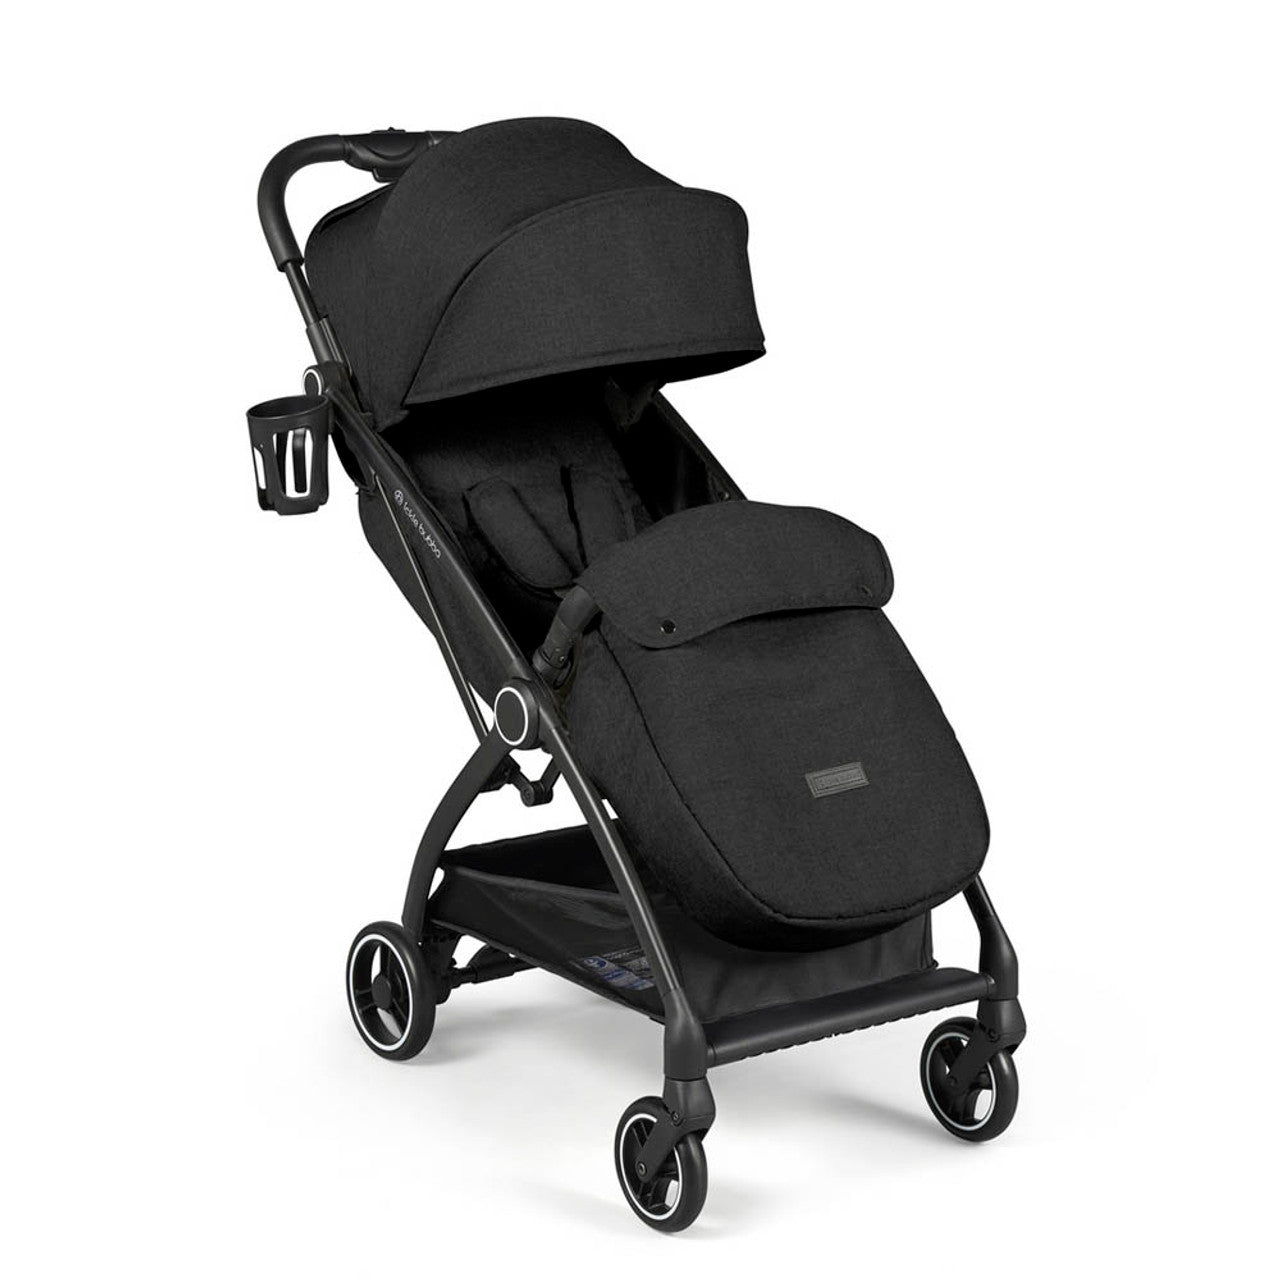 Ickle Bubba Aries Max Autofold Stroller - Black - For Your Little One